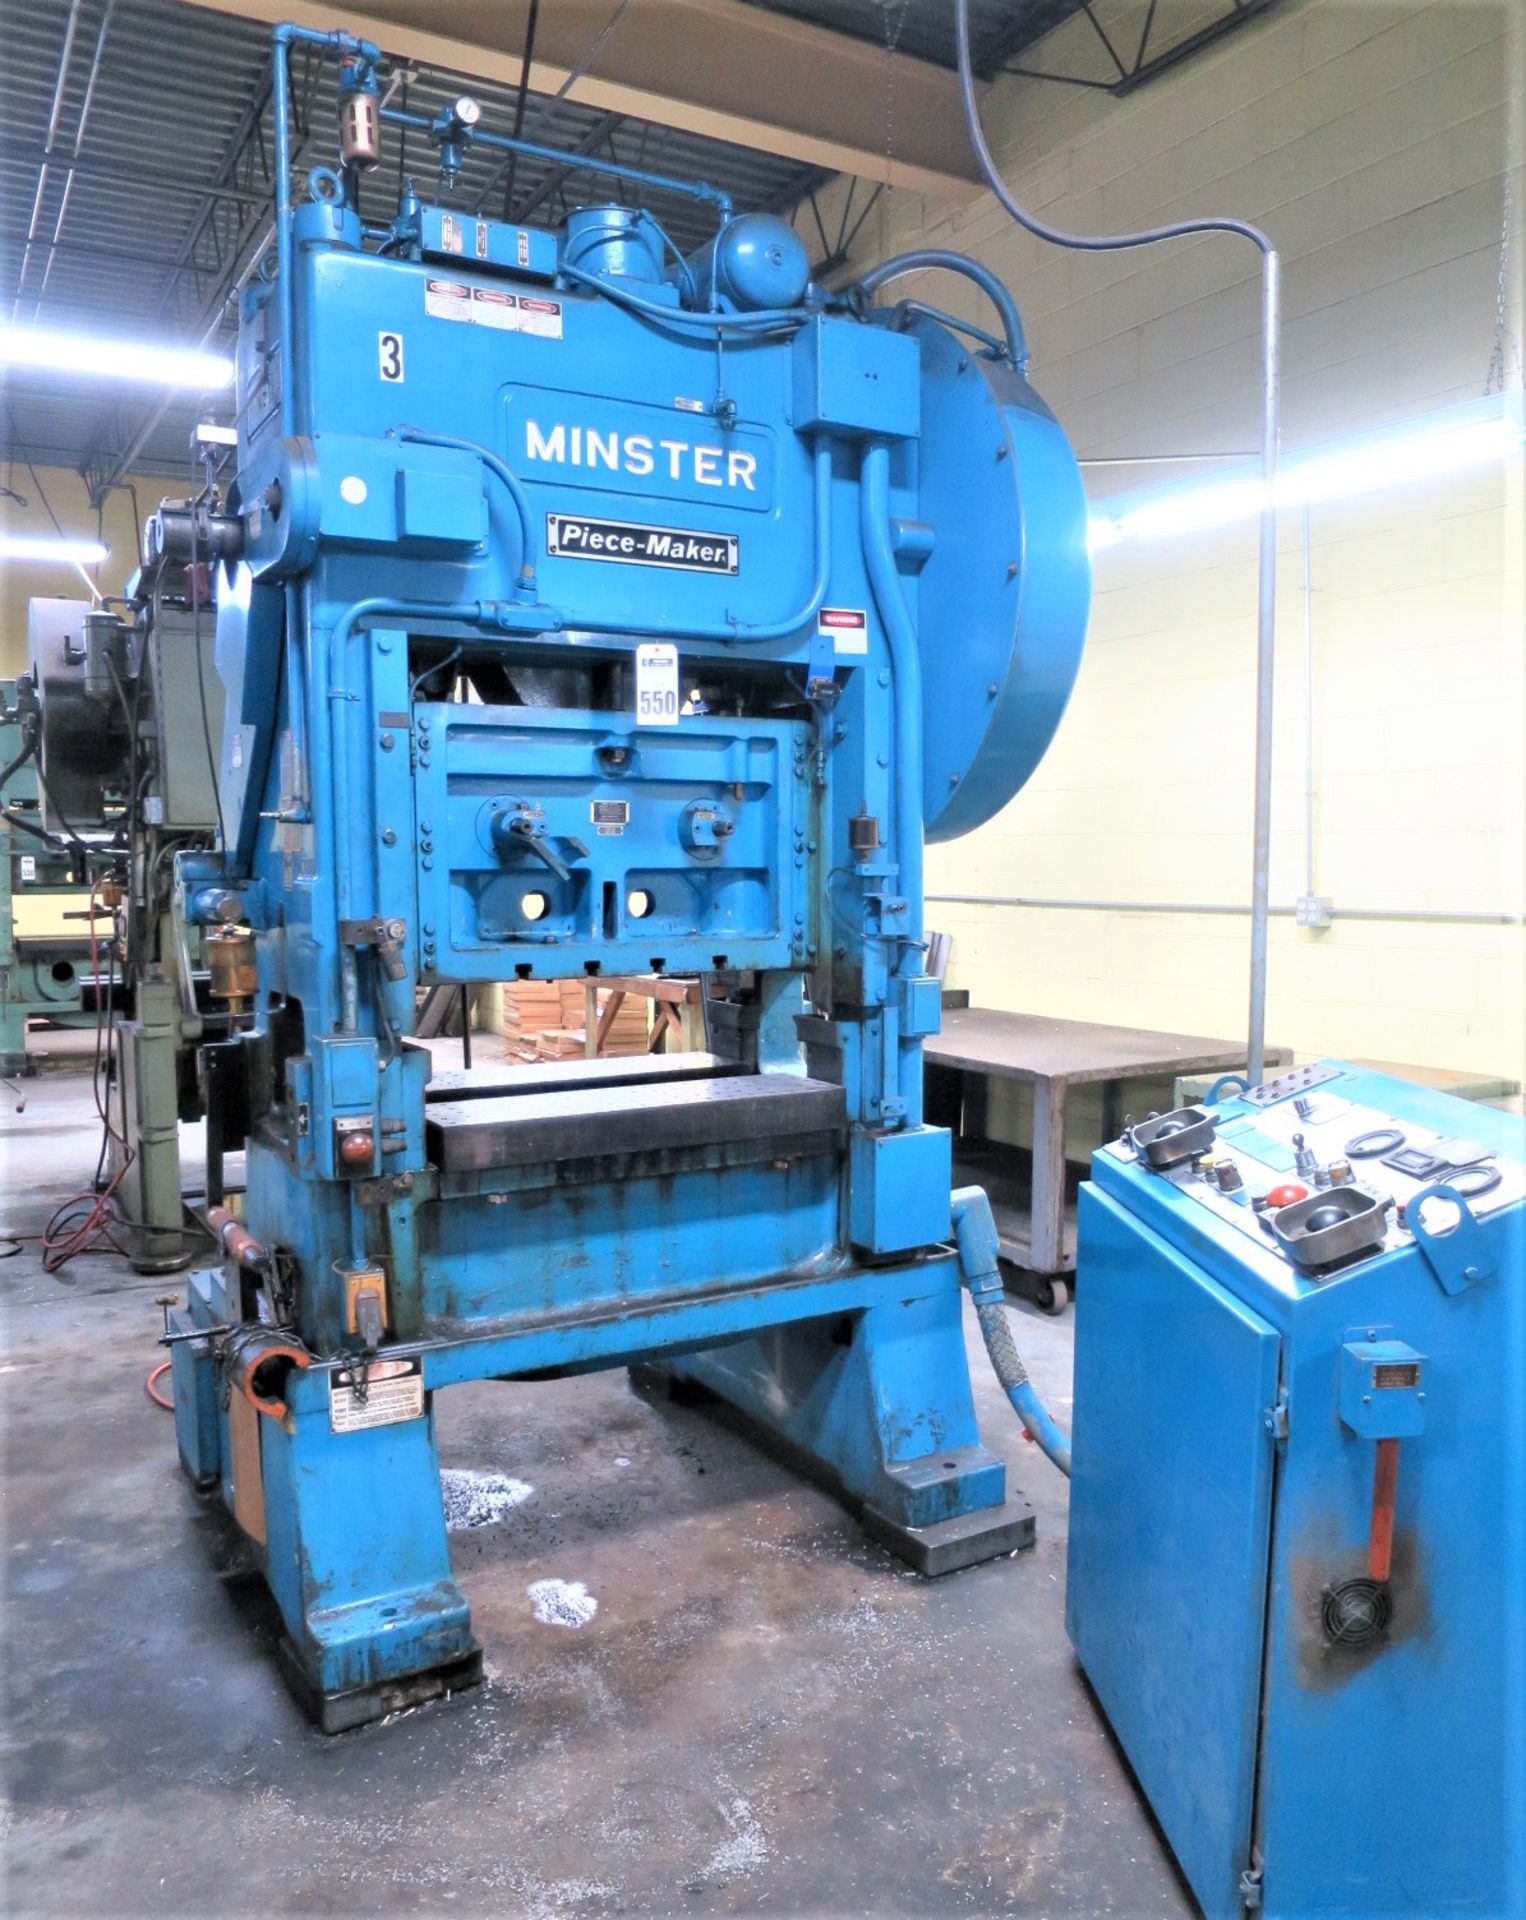 Minster 60 Ton Piece-Maker Variable Speed Straight Side Stamping Press Model P2-60-36, Sn P2-60-